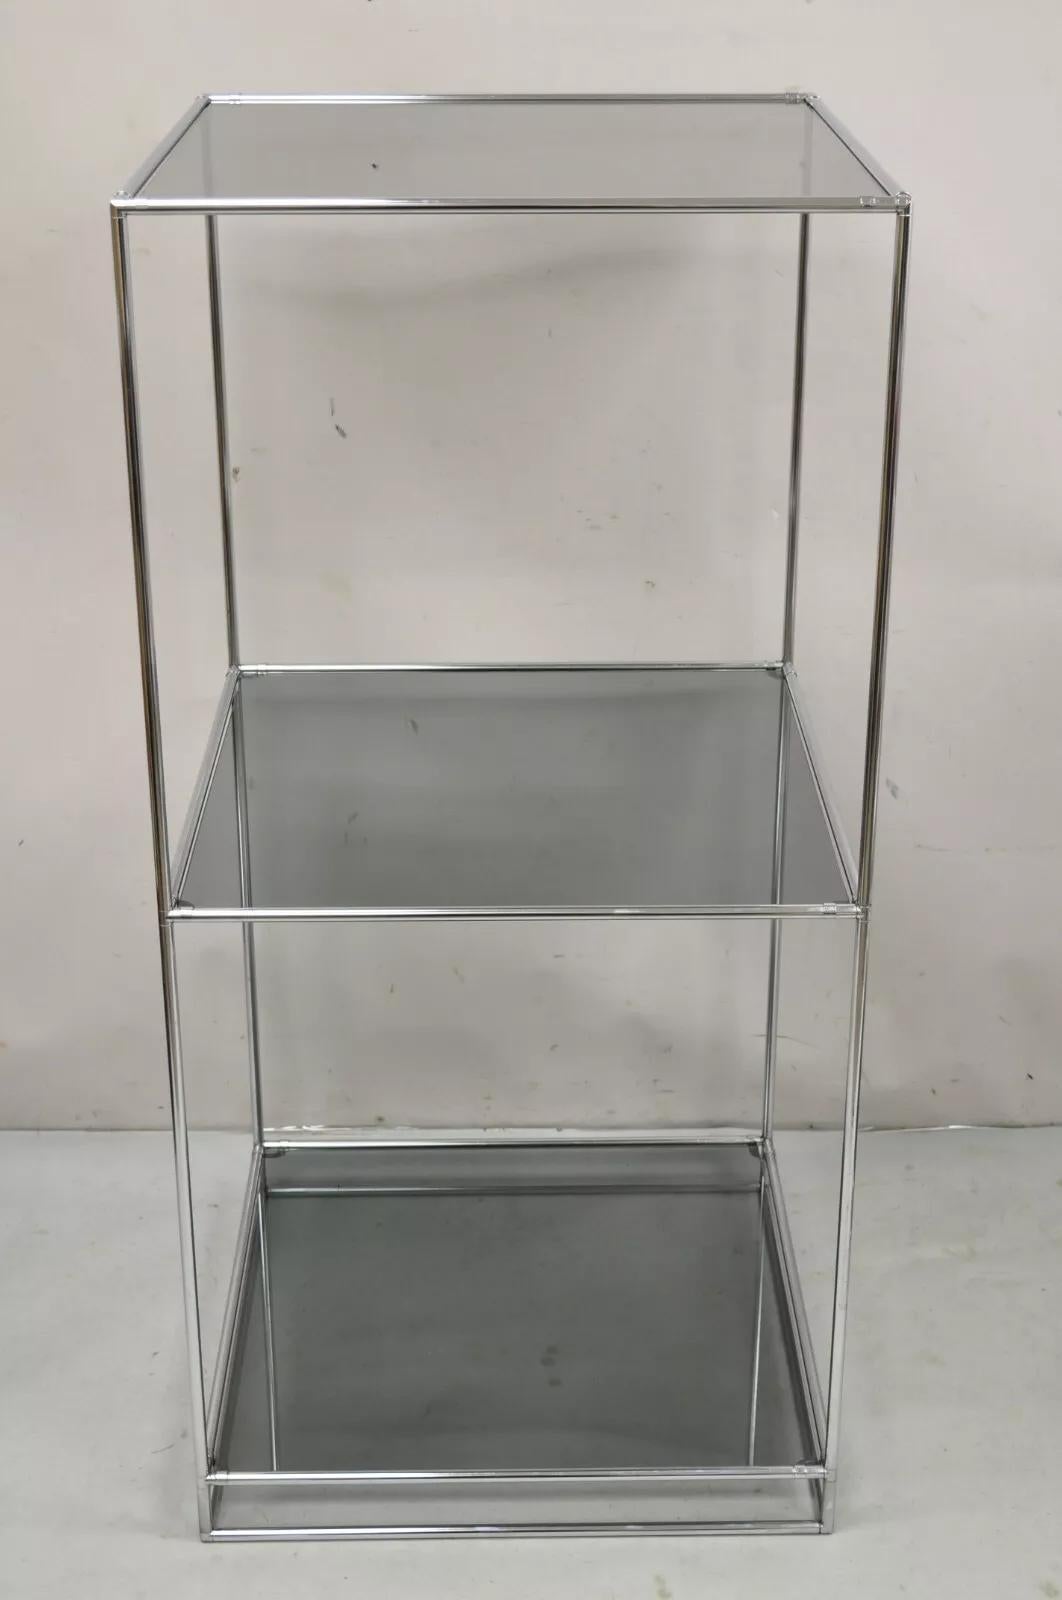 Abstracta Modular Shelf by Poul Cadovius for Royal System with Smoked Glass - 2 Pc Set. Item features 2 shelves with slight variation in shelf height, clean Modernist lines, great style and form. Circa Late 20th Century. Measurements: (A): 50